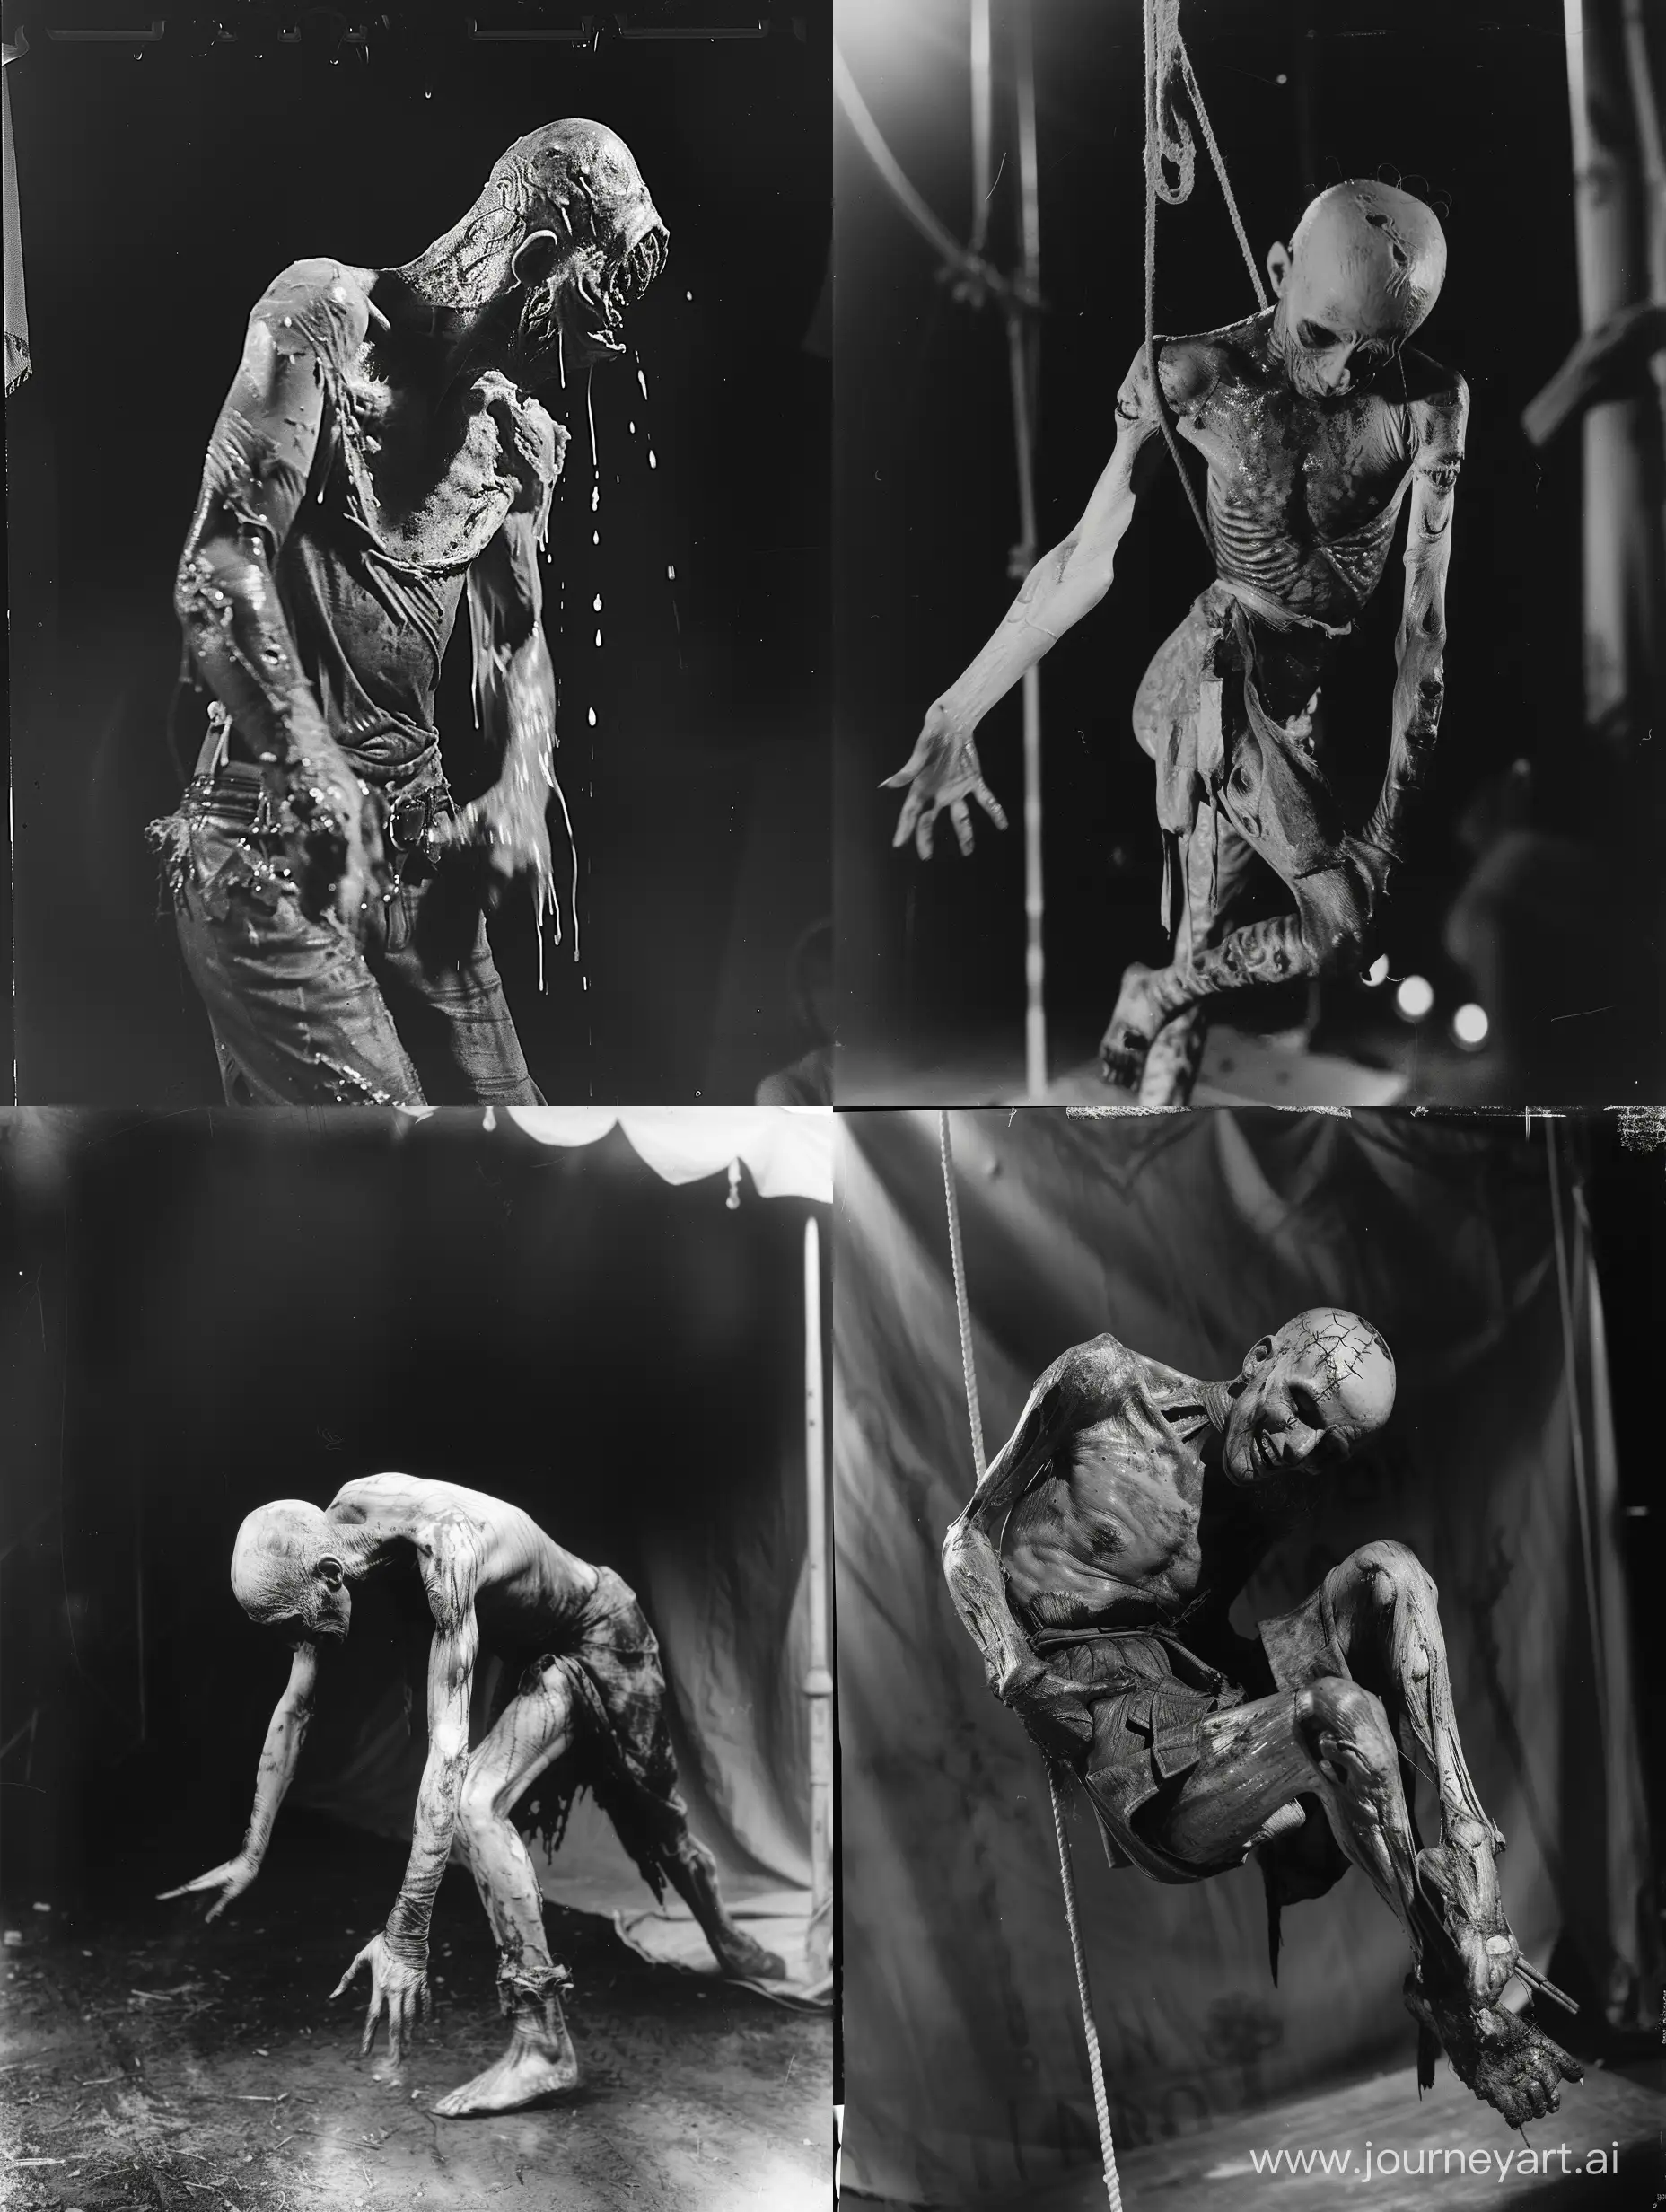 The Body Horror Circus: A sadistic carnival where grotesque performers showcase their contorted and grossly bodies shocking and horrifying the audience with their twisted physicality, expired 35mm film, nightmare fuel